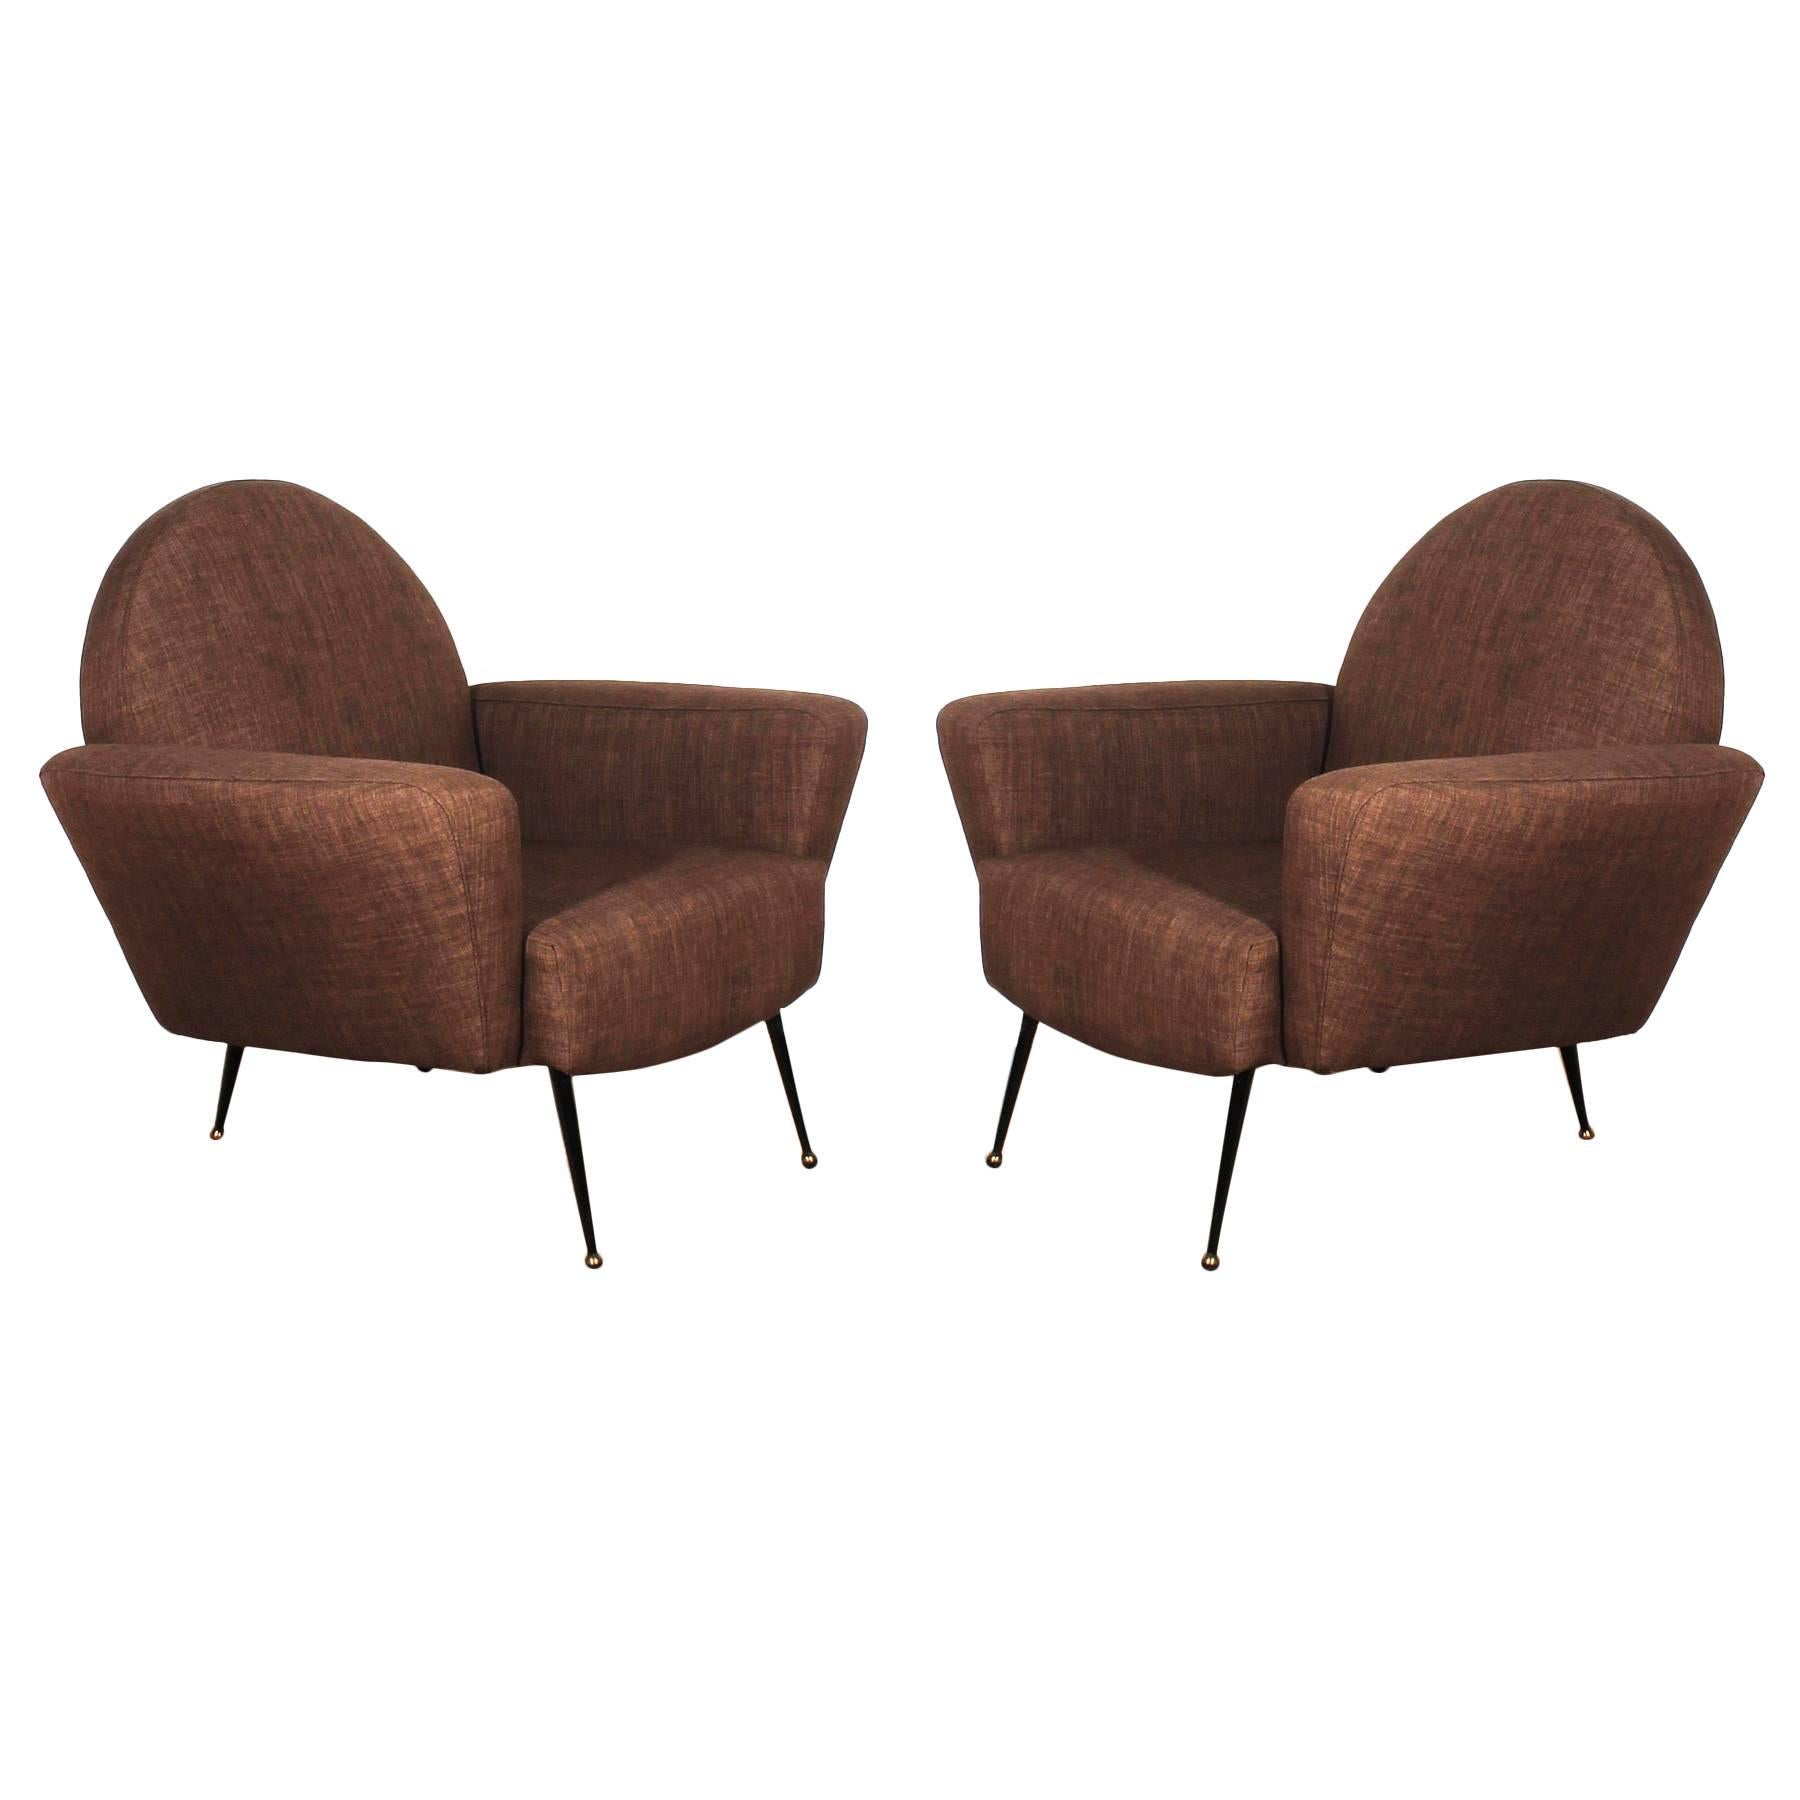 1955, Pair of Armchairs, Iron, Brass, Fabric, France